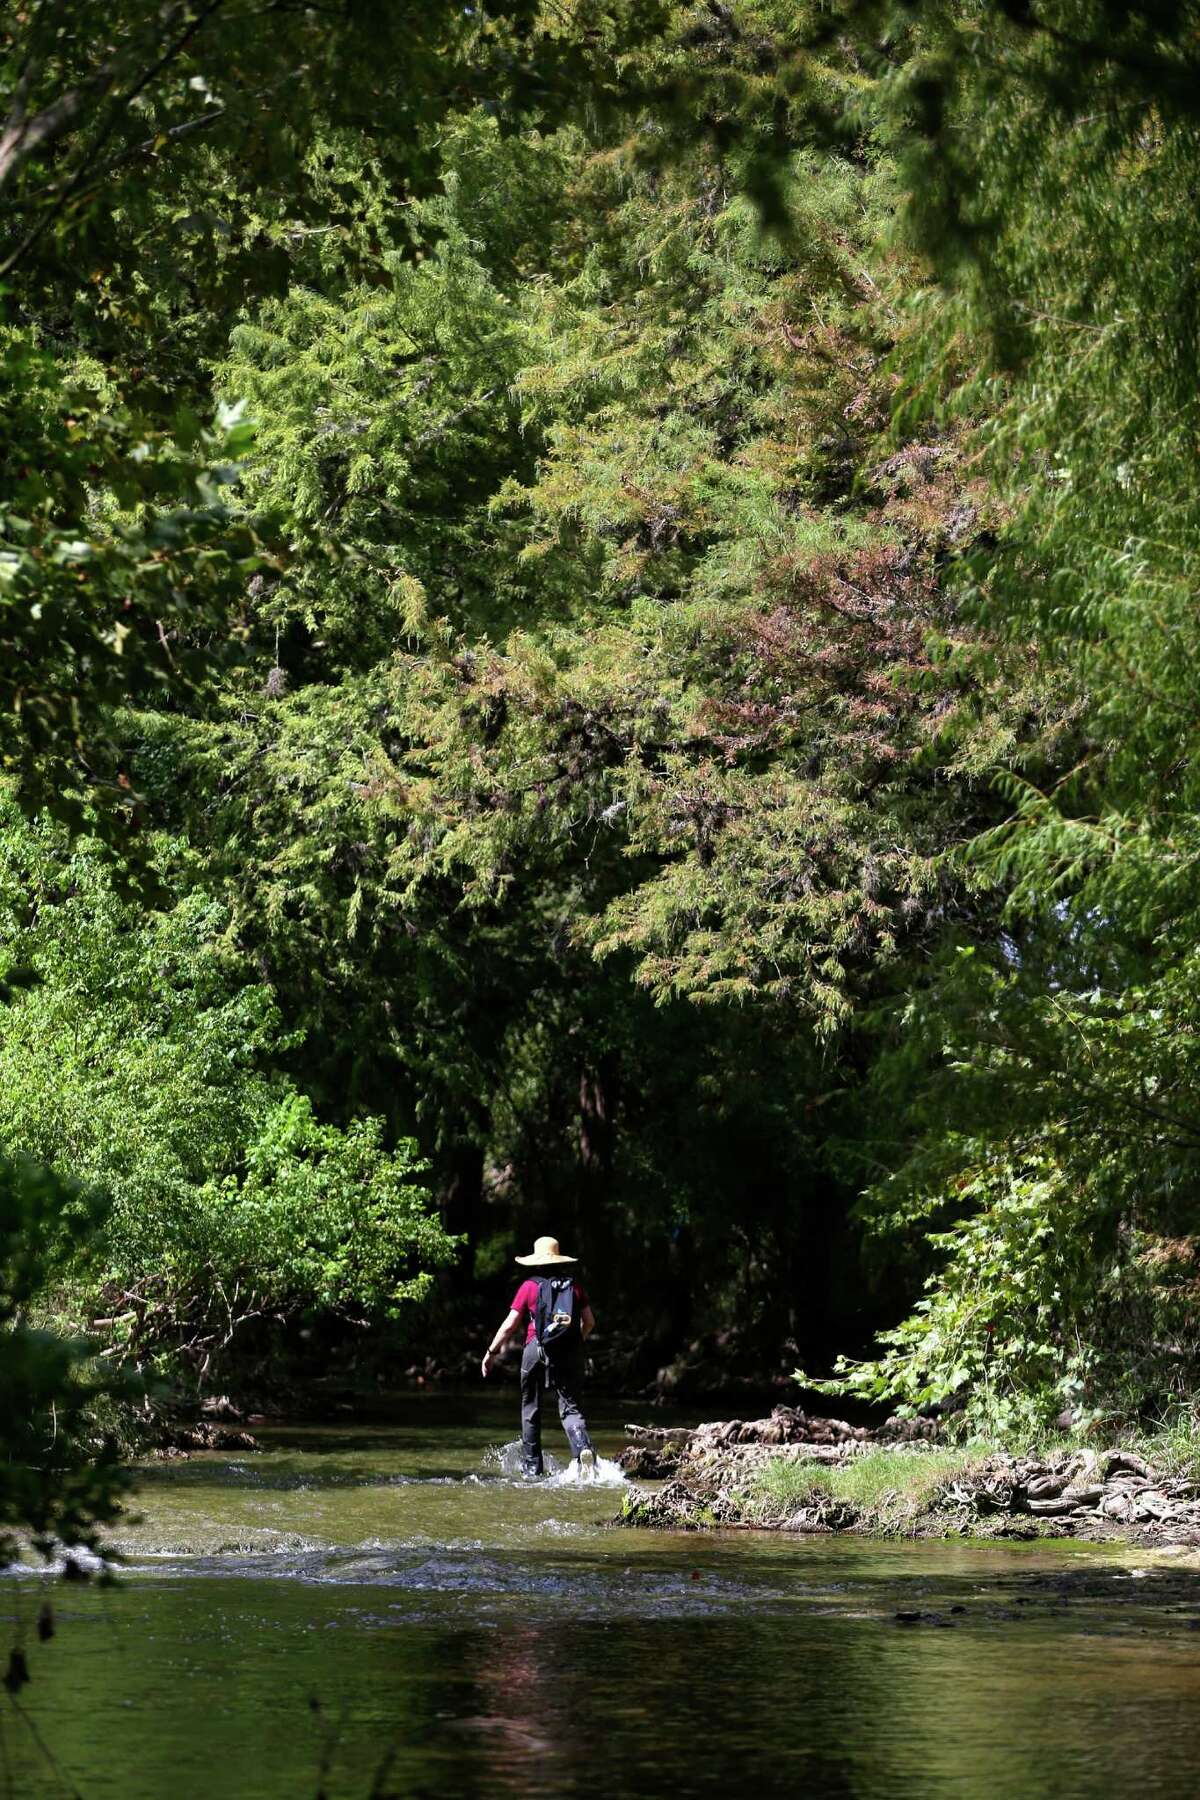 ABOVE: Texas Parks and Wildlife Department Water Resources employee Anne Rogers walks Wednesday, Sept. 14, 2016 up Cibolo Creek on the Cibolo Preserve. Bill Lende, who owned the land and established the preserve located just down stream from the Cibolo Nature Center in Boerne, died Friday.